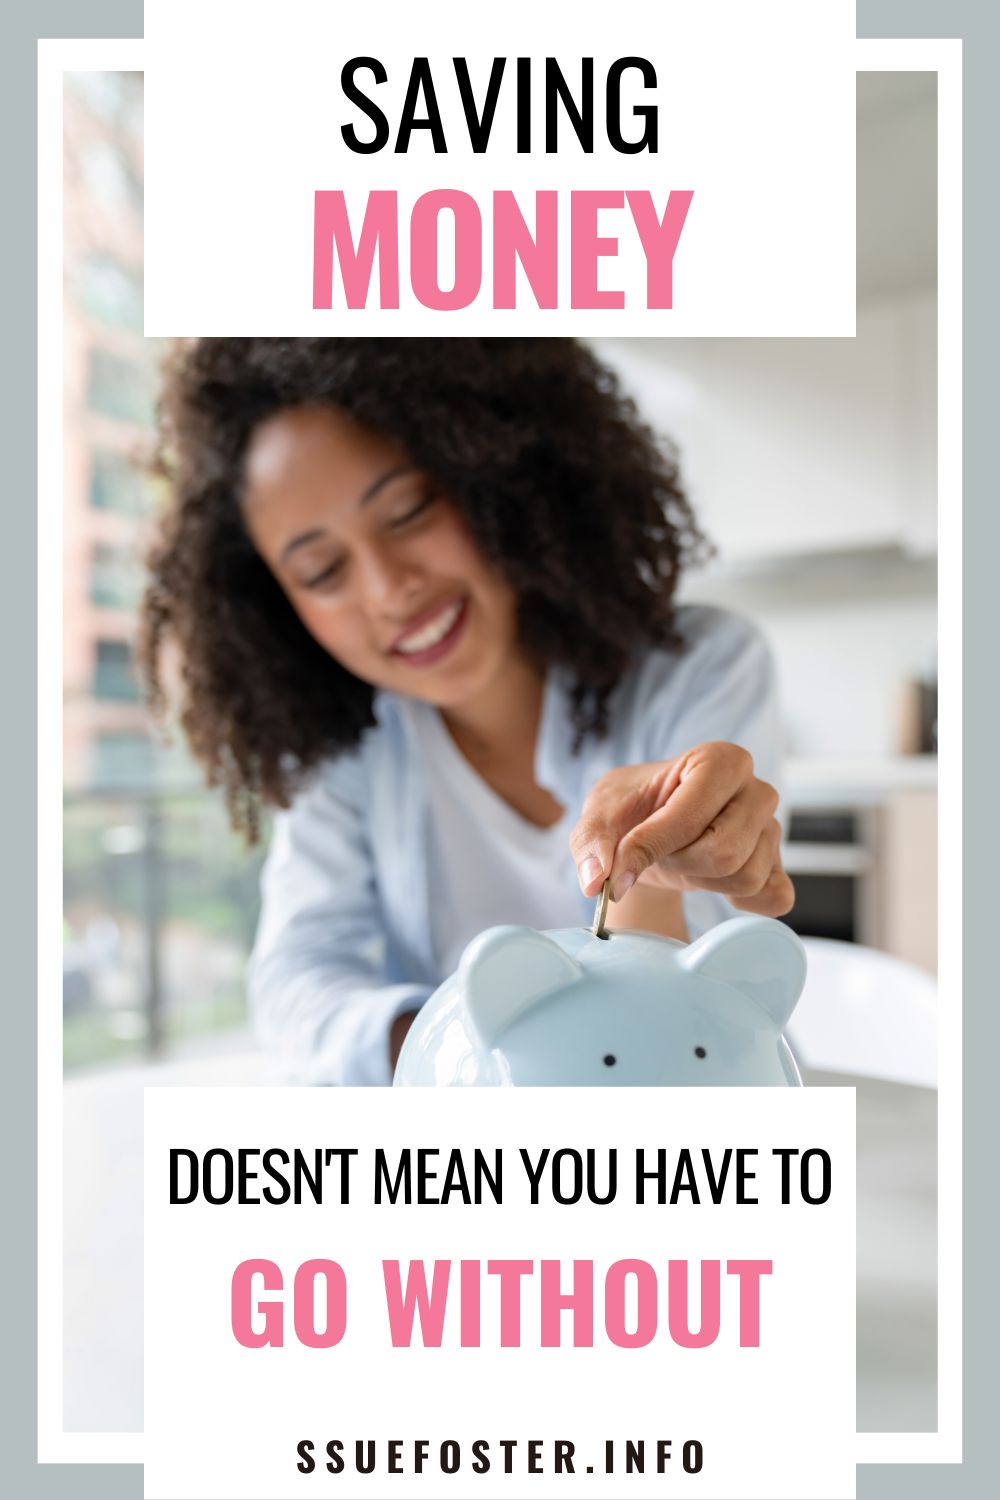 Saving money is an important part of effectively managing your finances, even though it might not feel like the easiest thing in the world.